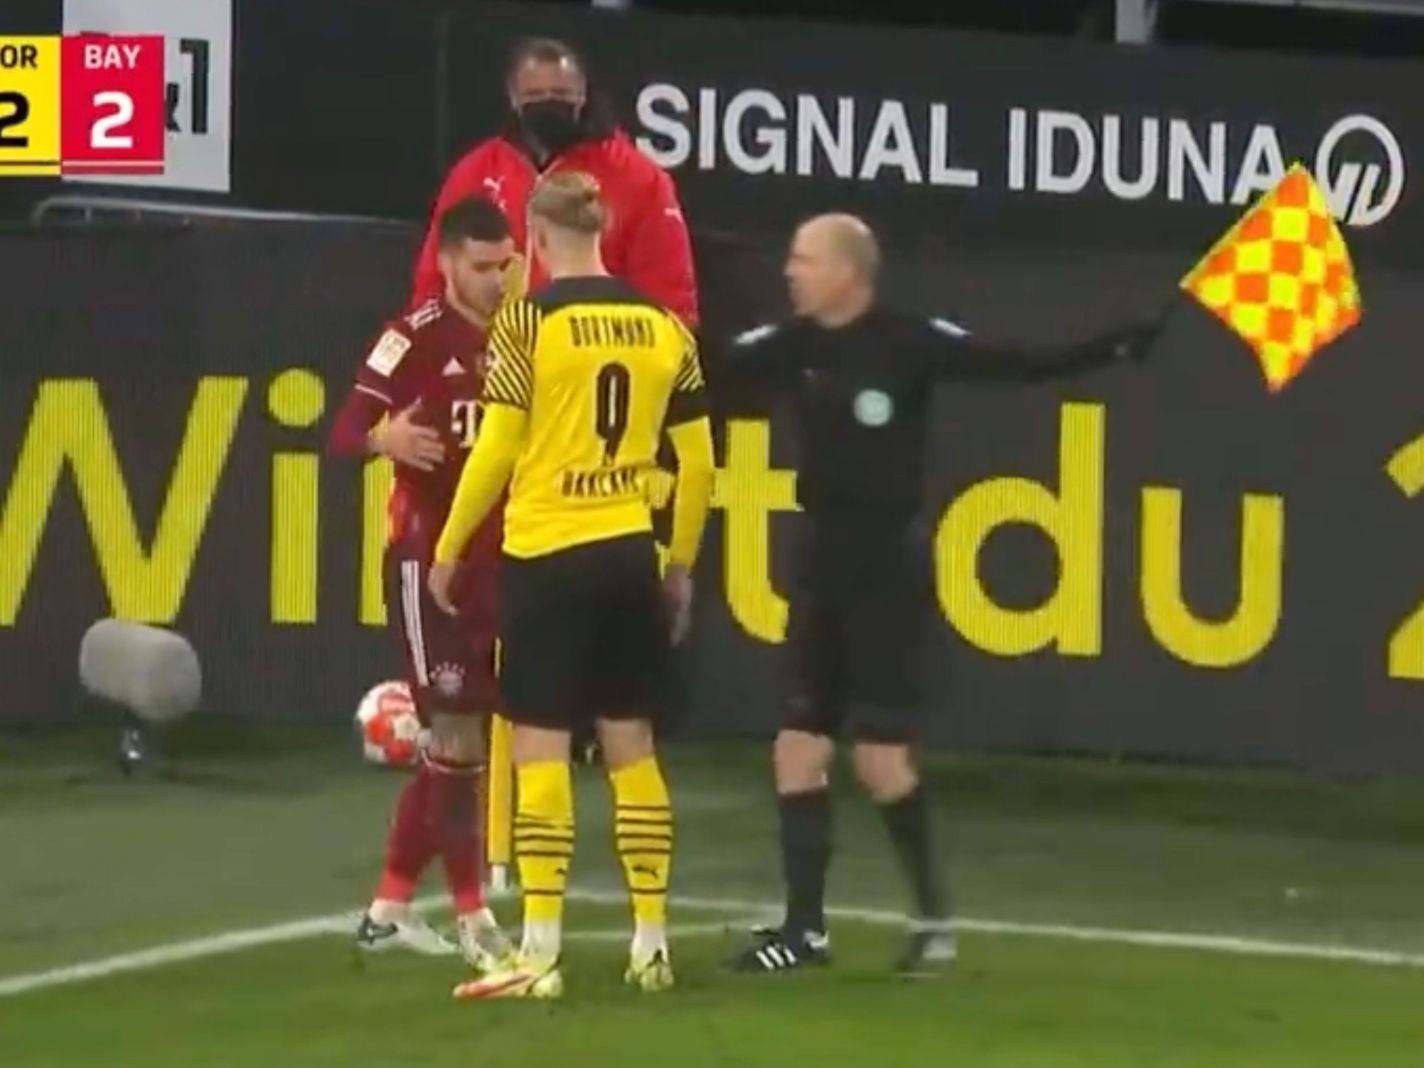 Why the Lucas Hernandez handshake with Erling Haaland was so surprising